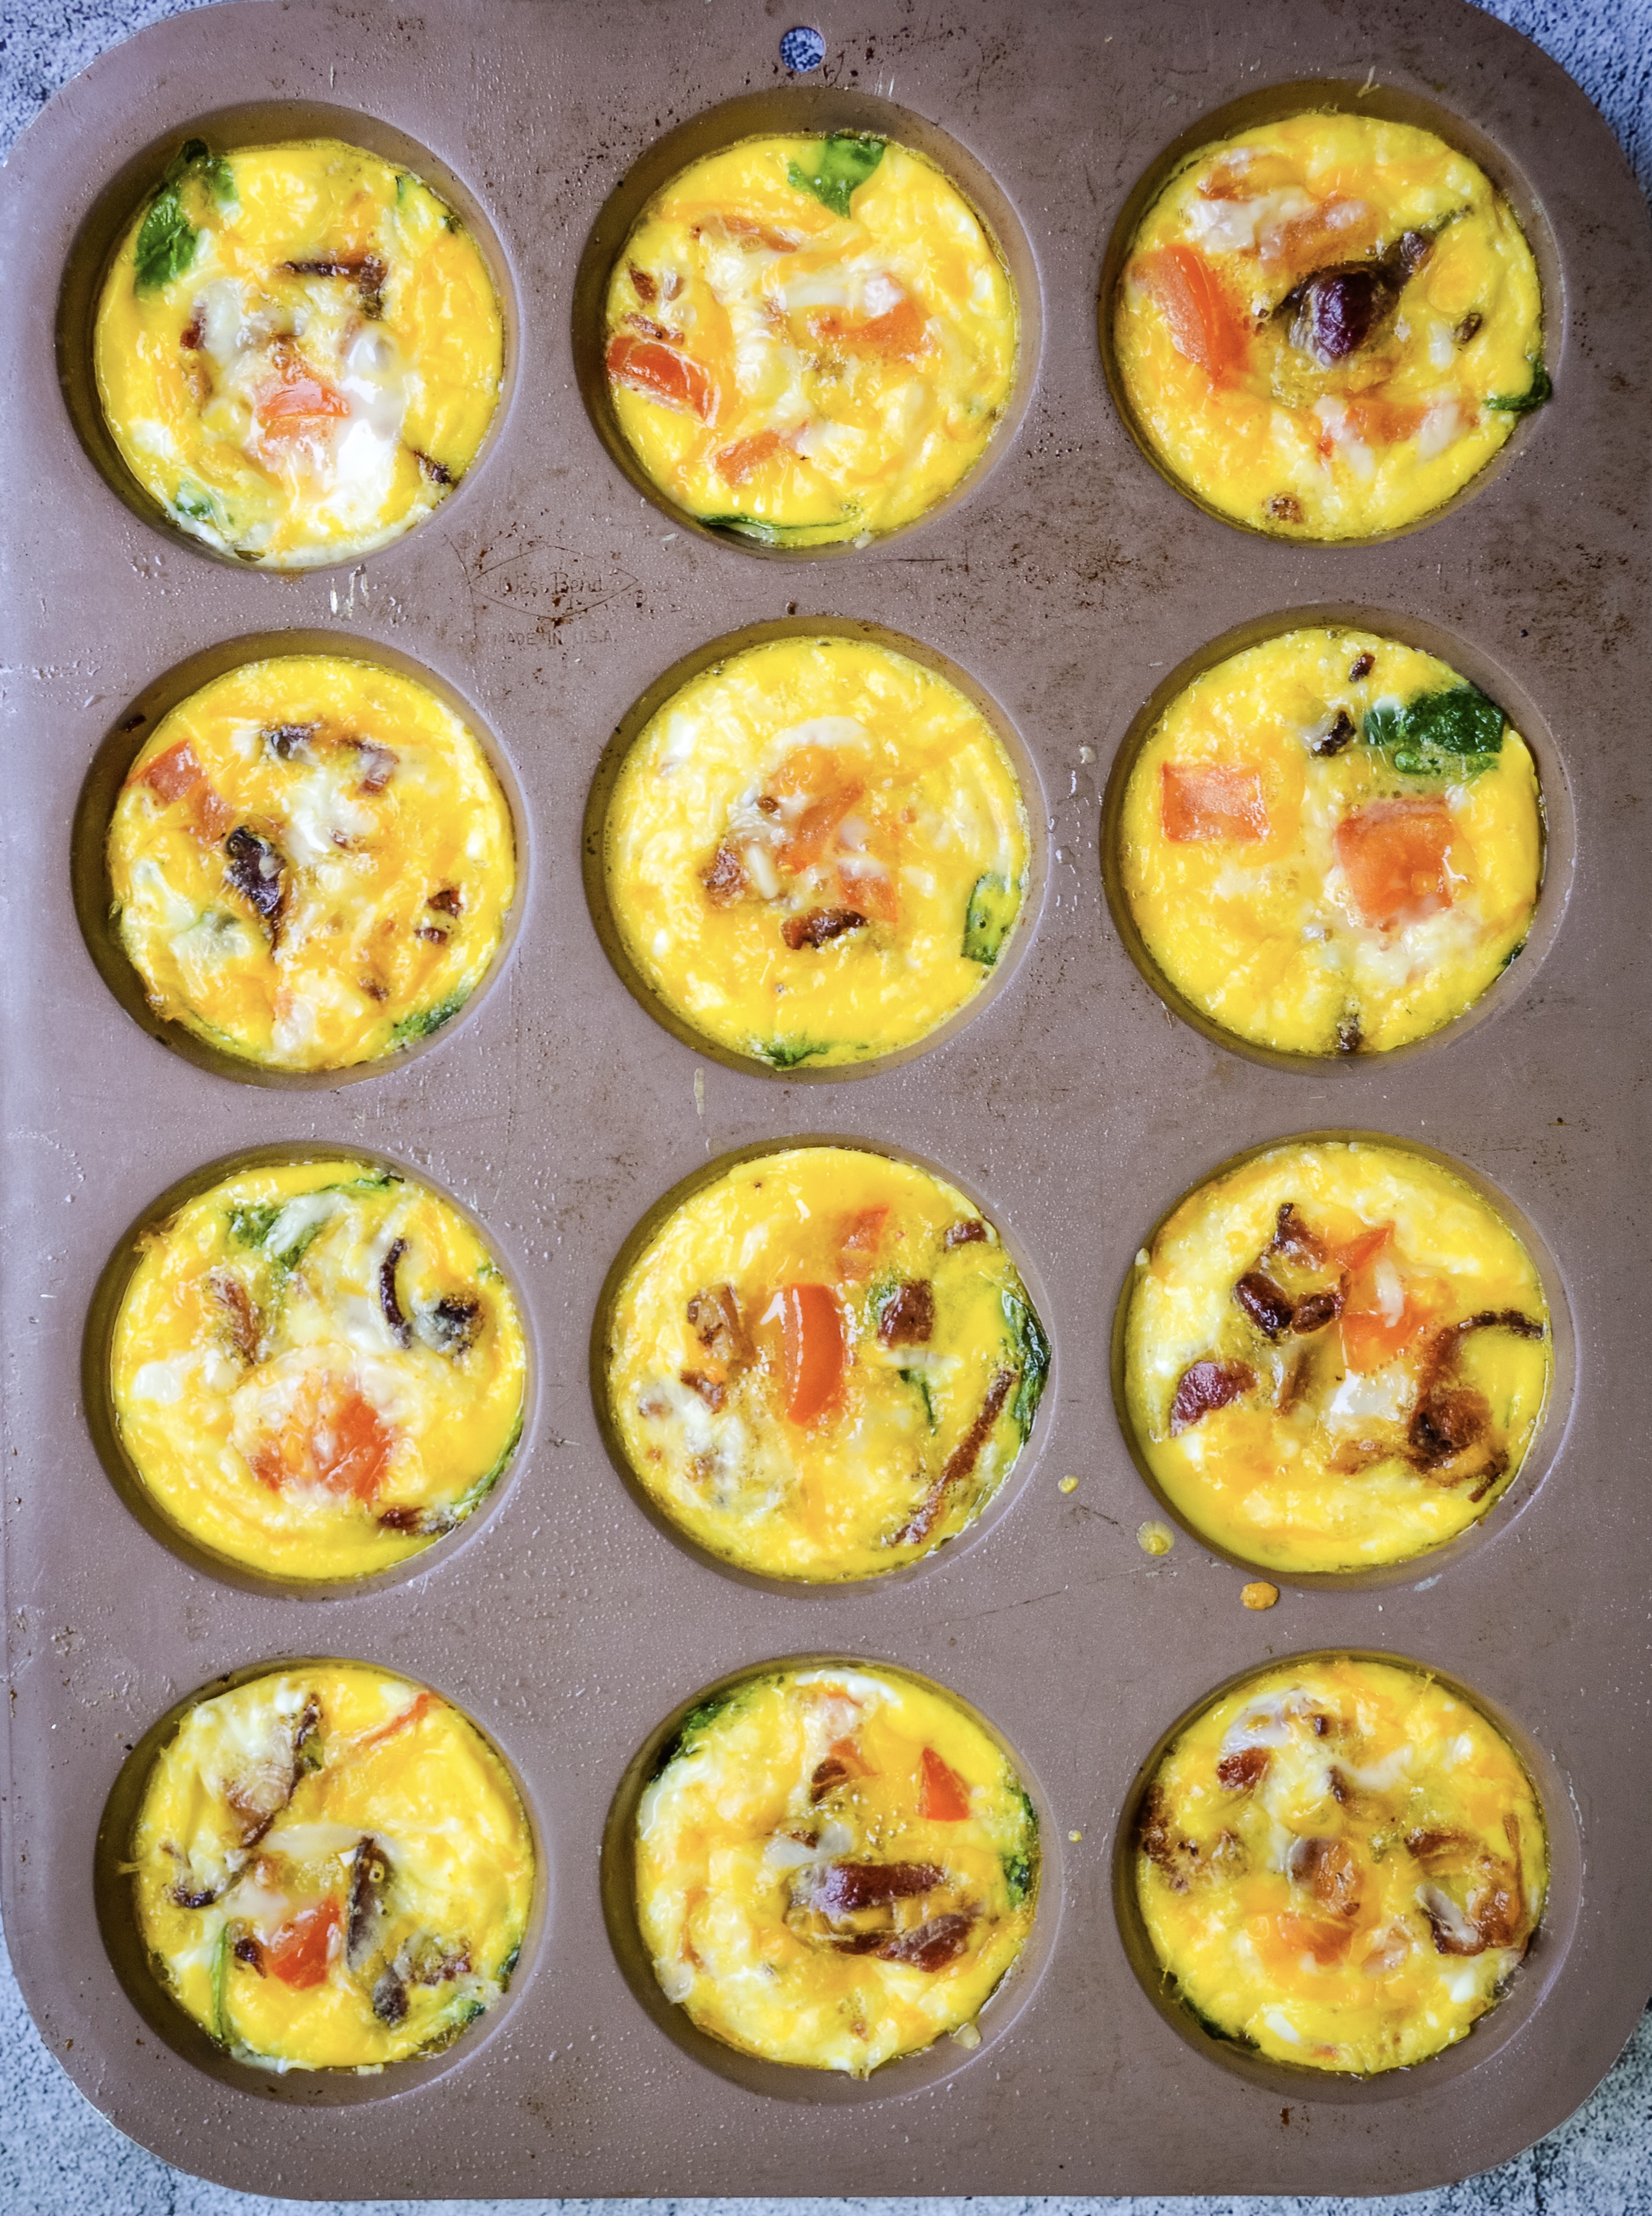 12 Uses For Your Muffin Tin You Need To Know About